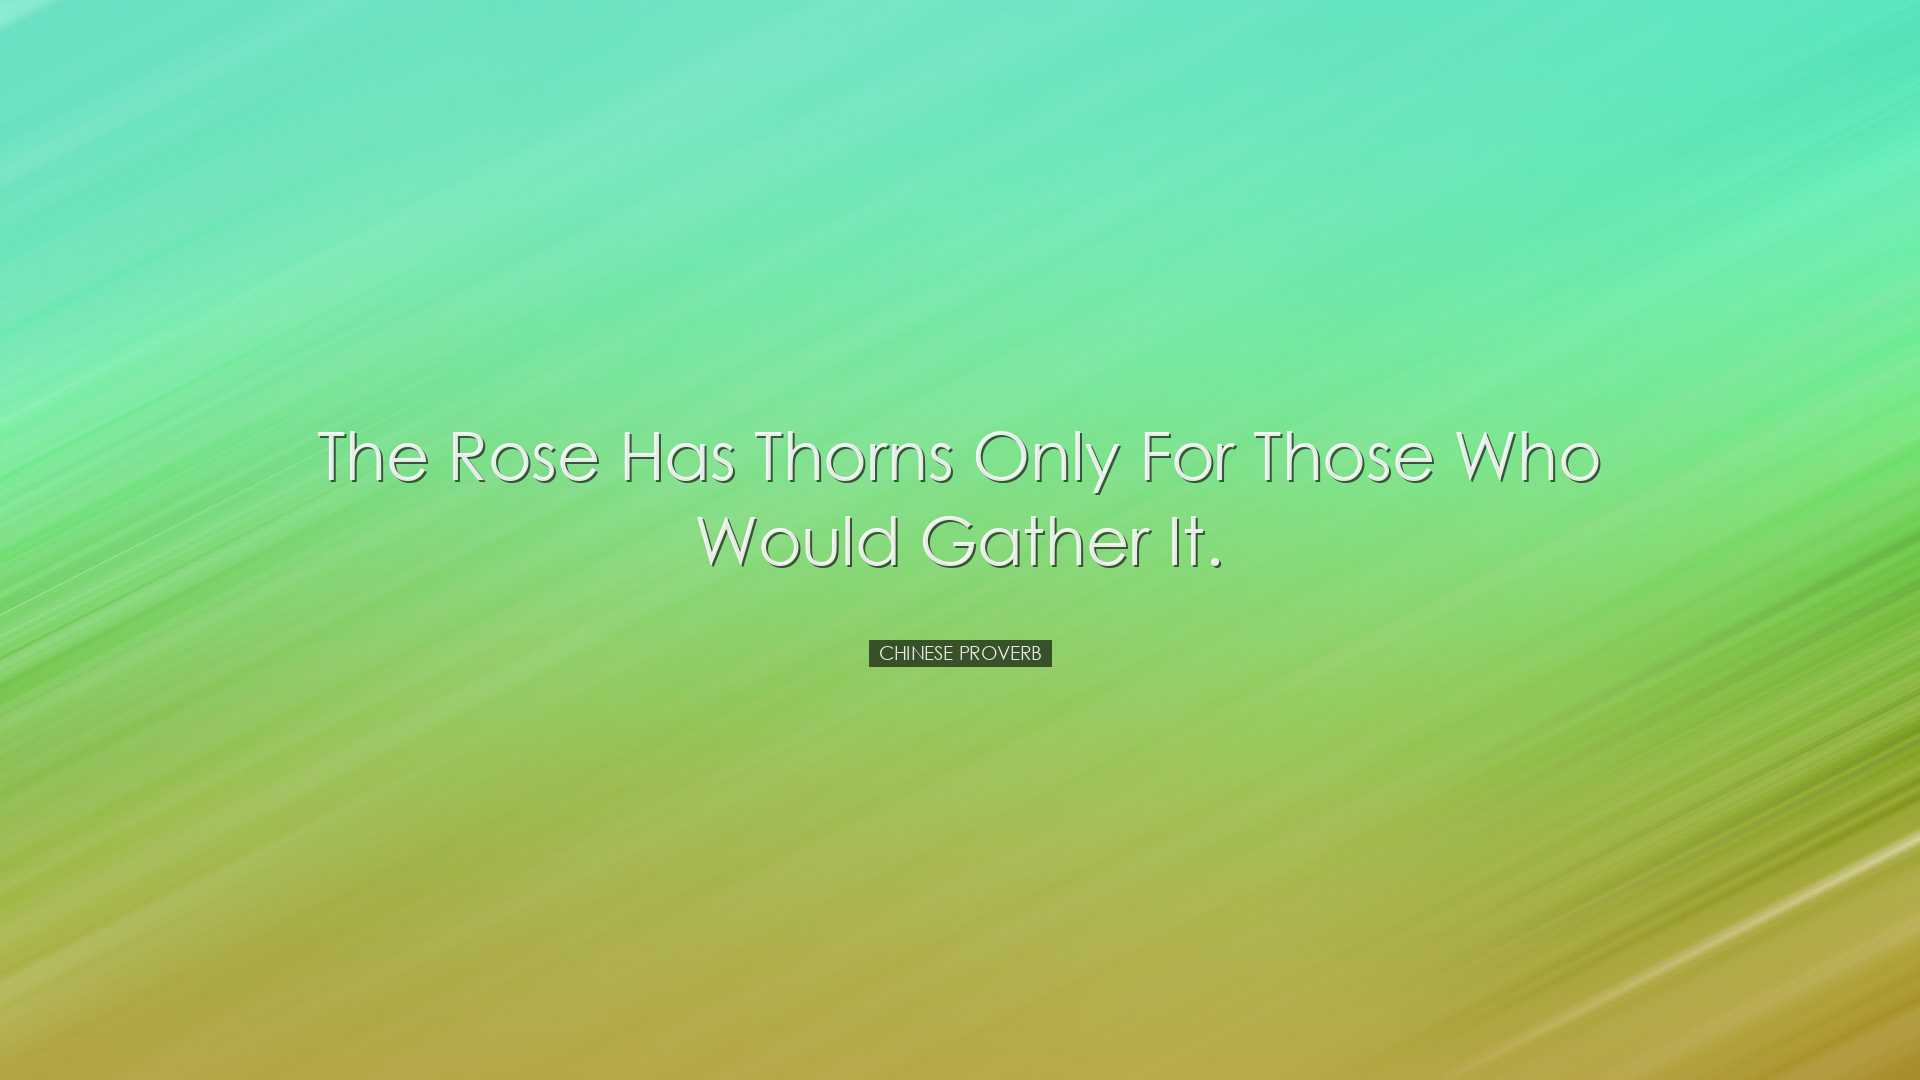 The rose has thorns only for those who would gather it. - Chinese